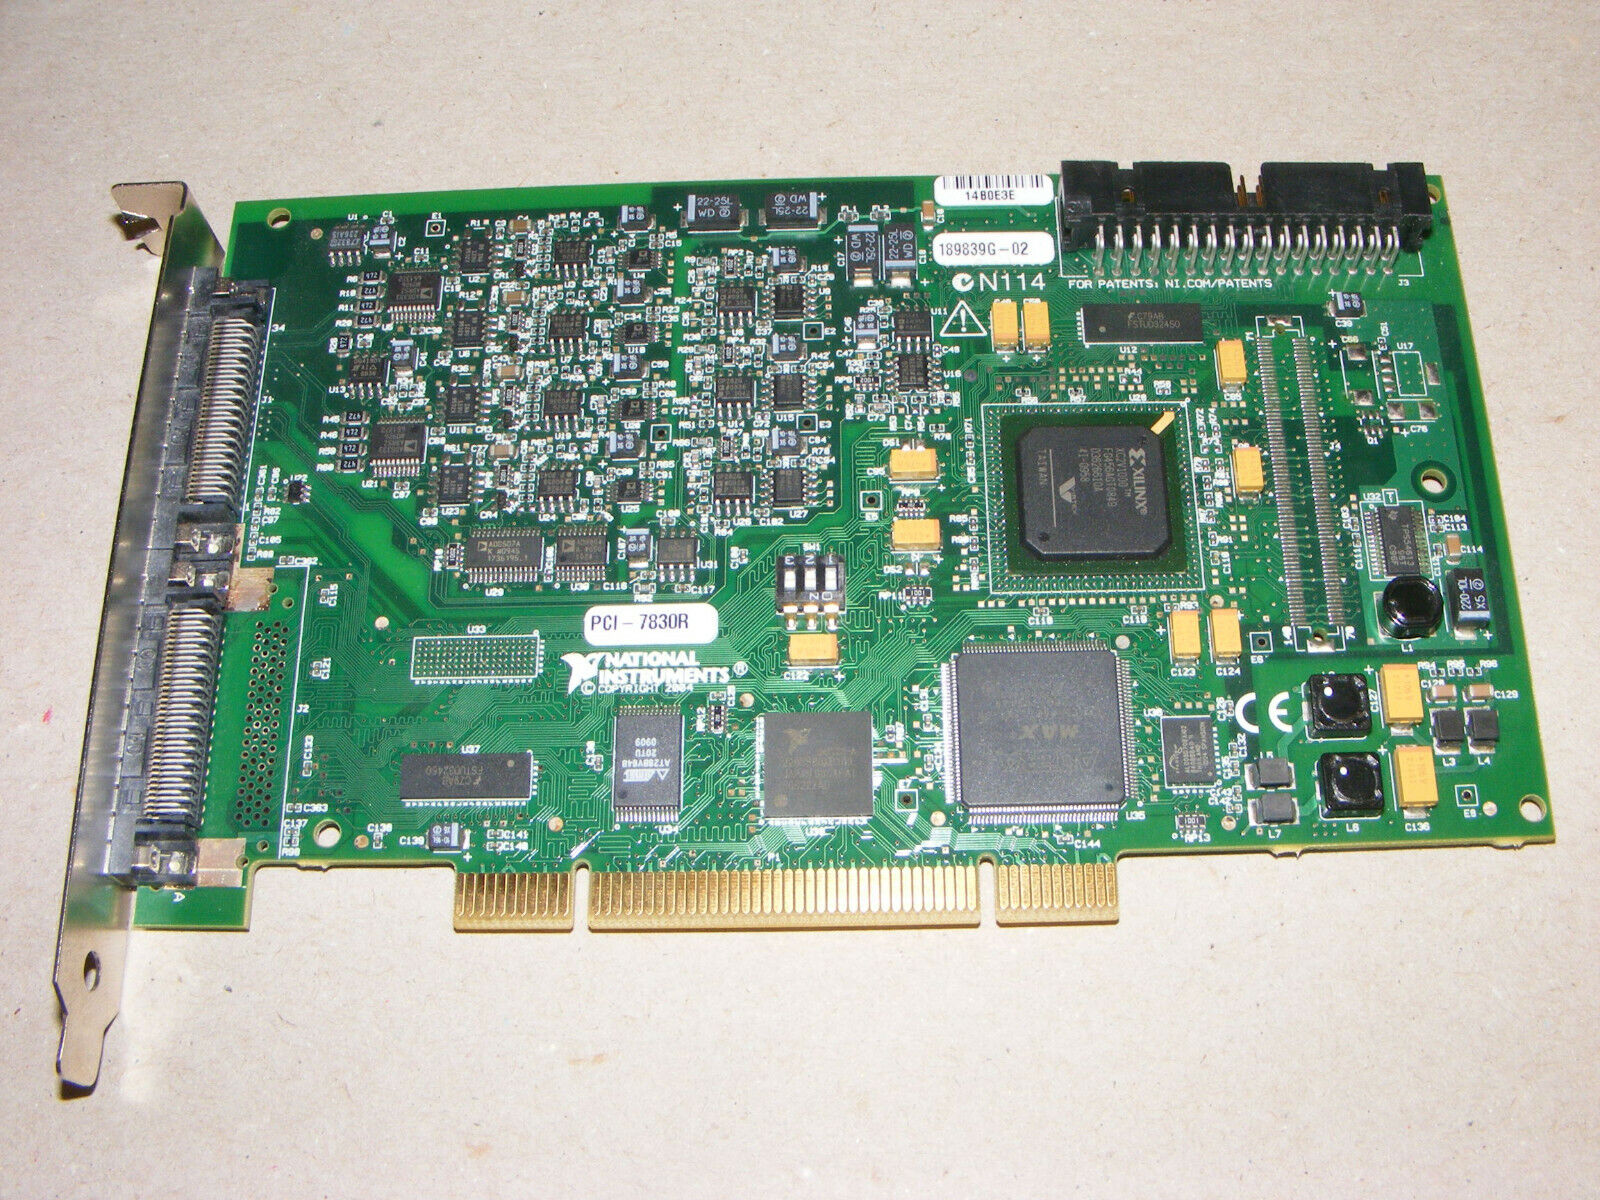 NATIONAL INSTRUMENTS Over item handling ☆ PCI 7830R O MULTI-FUNCTION RECONFIGURABLE Ranking TOP1 I